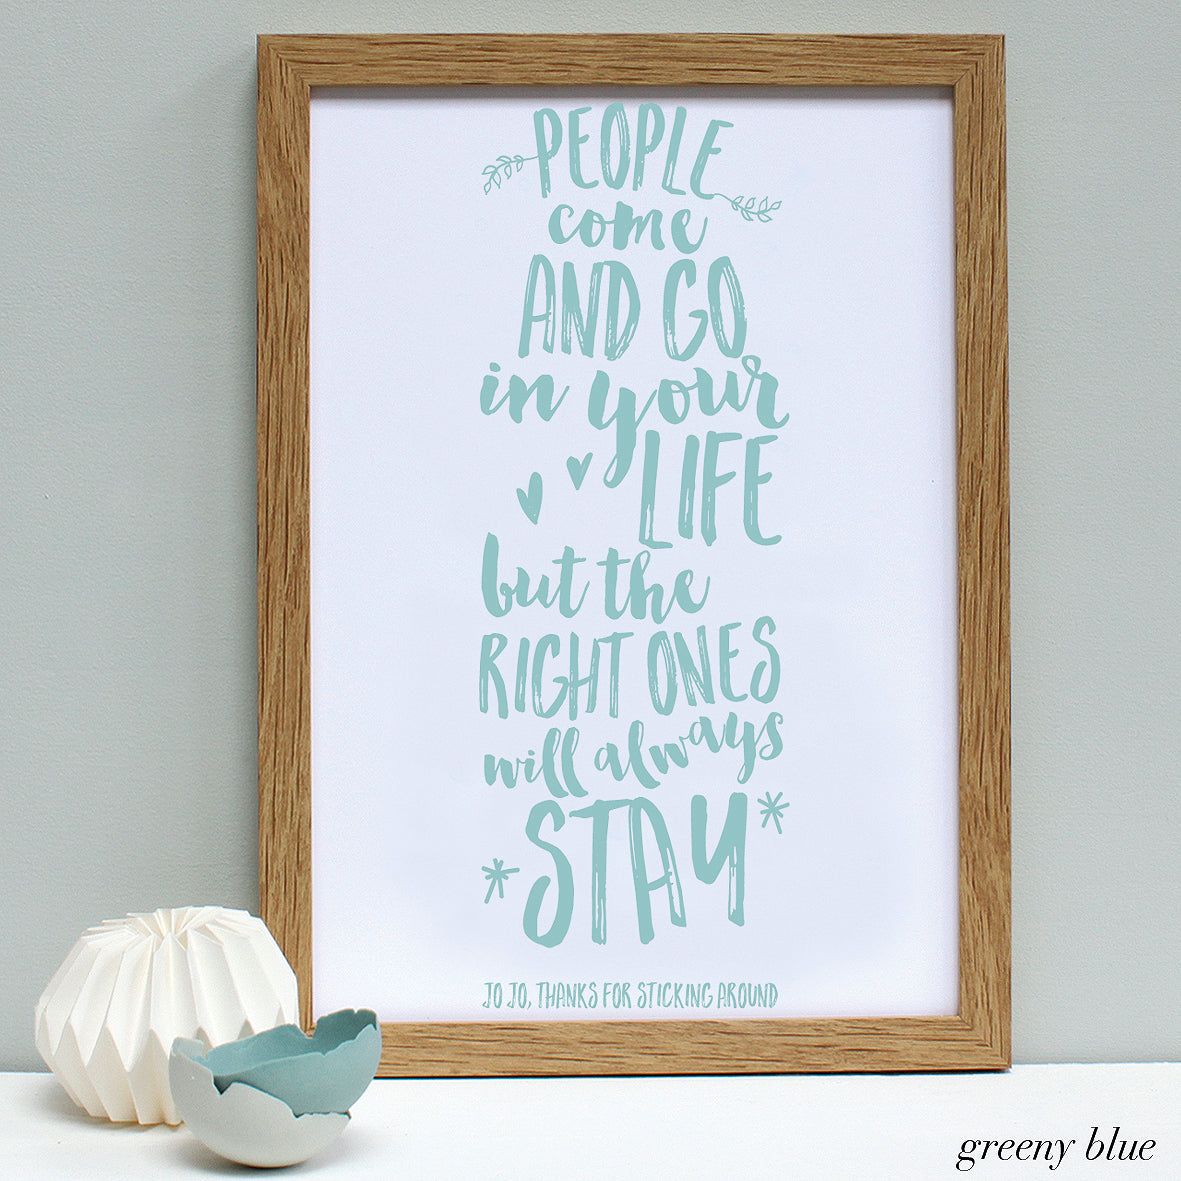 personalised friend quote print, oak frame